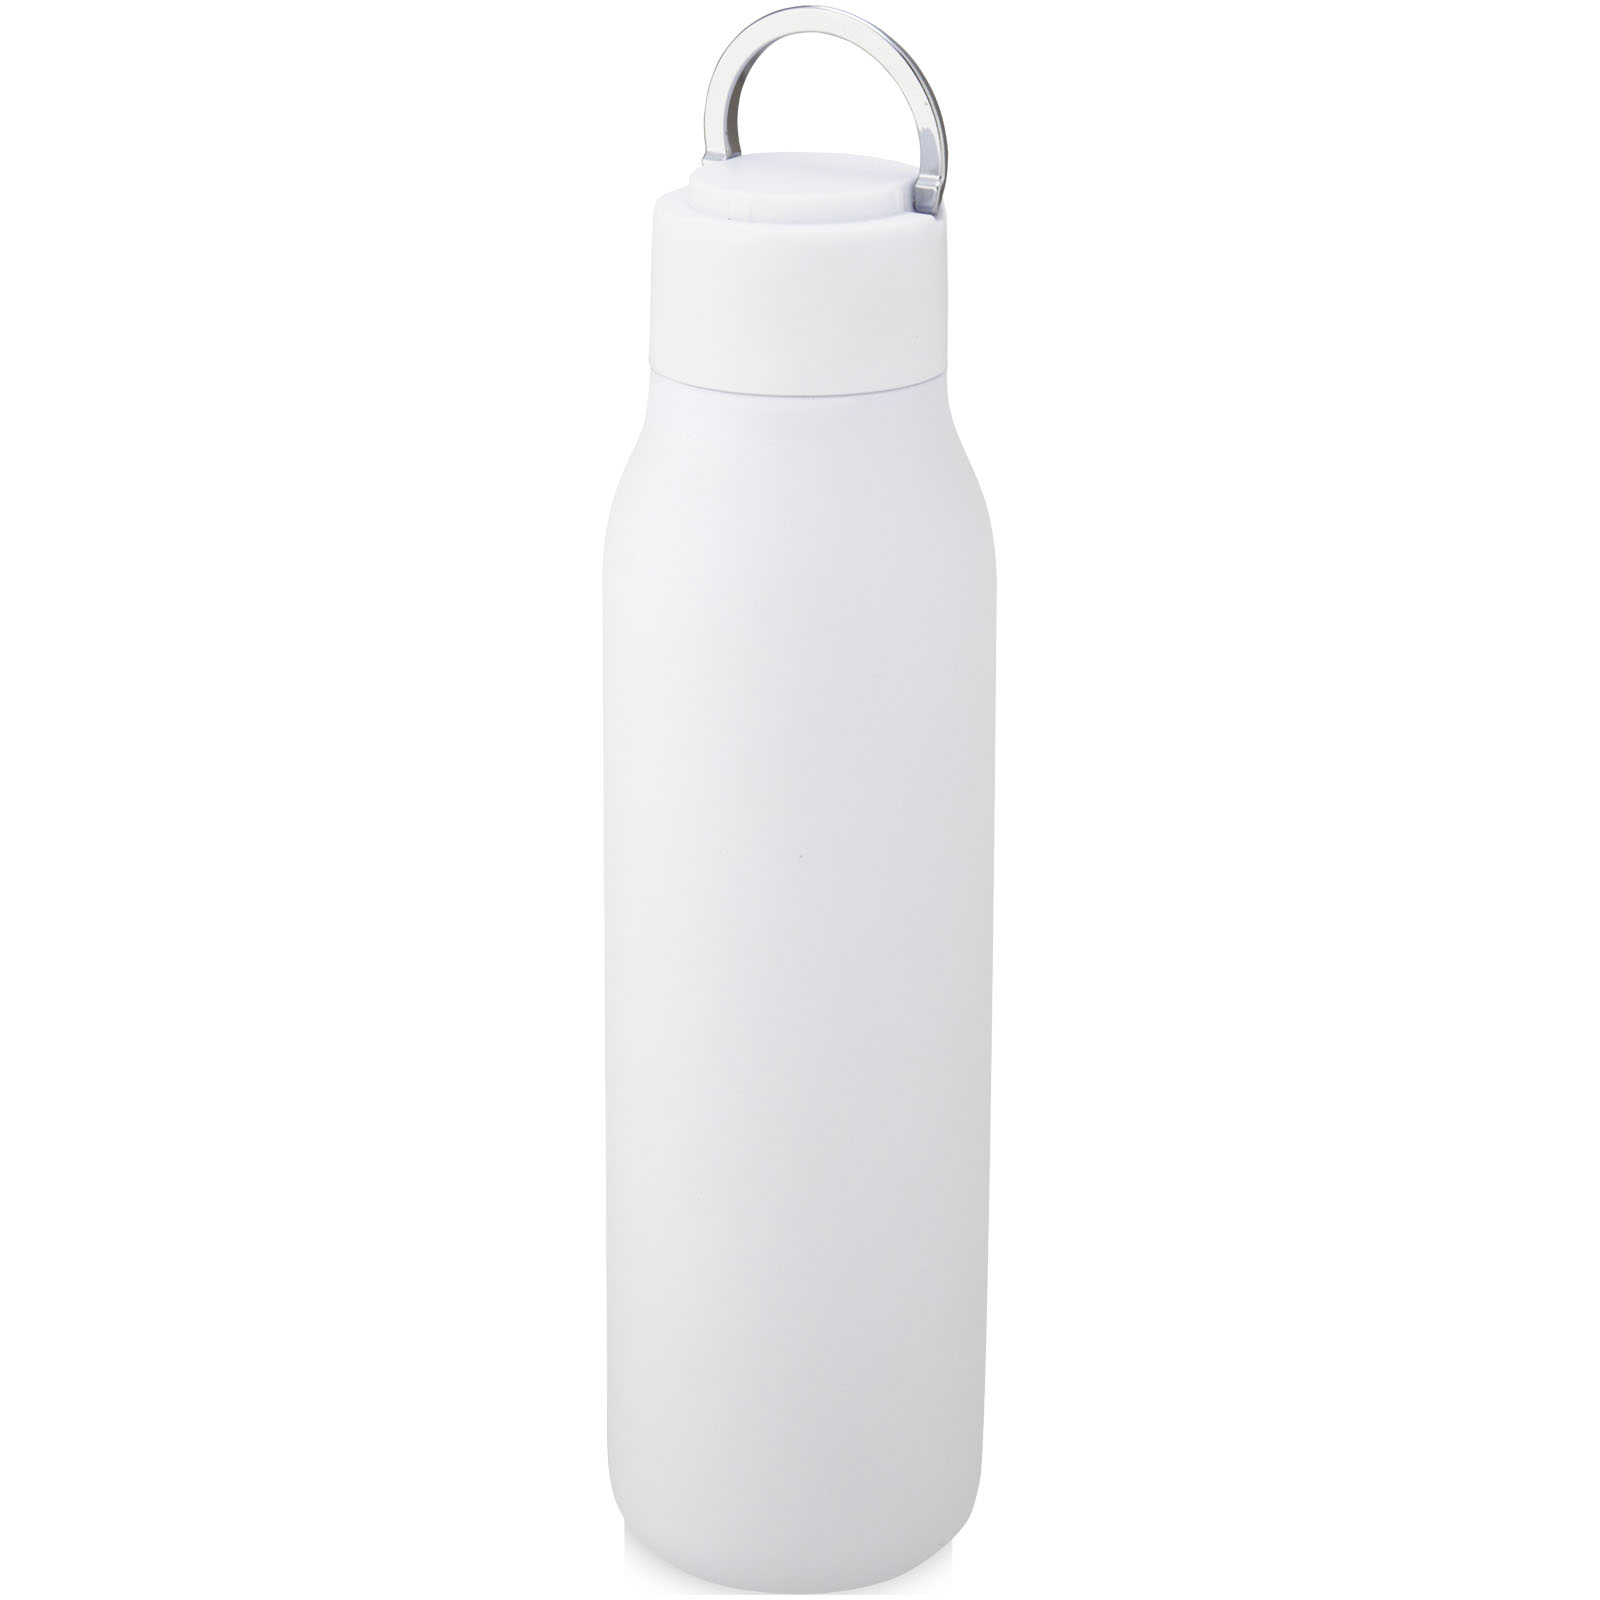 Advertising Insulated bottles - Marka 600 ml copper vacuum insulated bottle with metal loop - 5